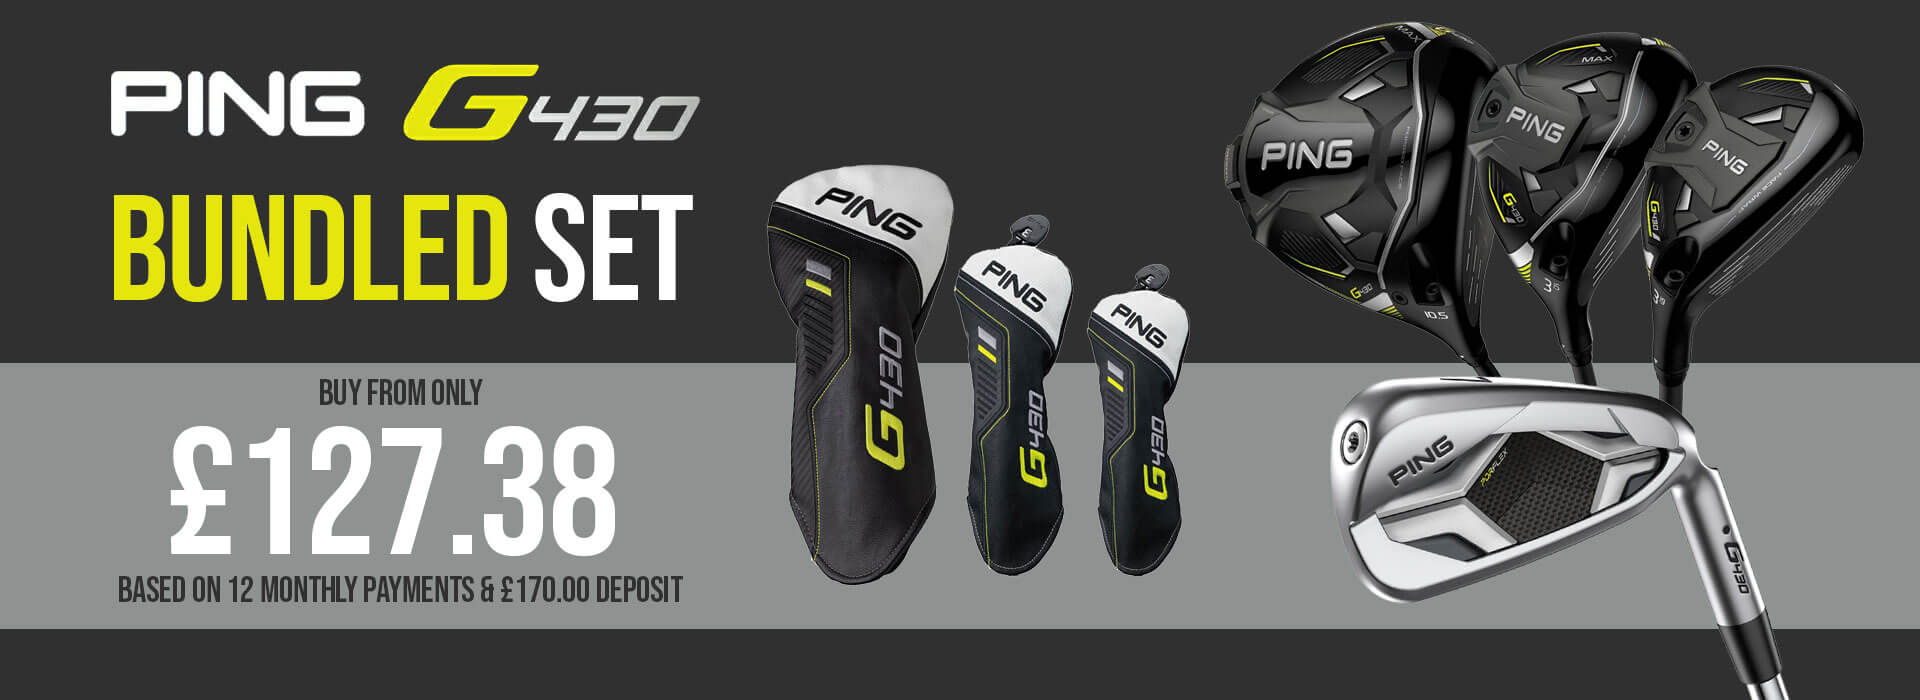 Ping G430 Max Package Set Banner